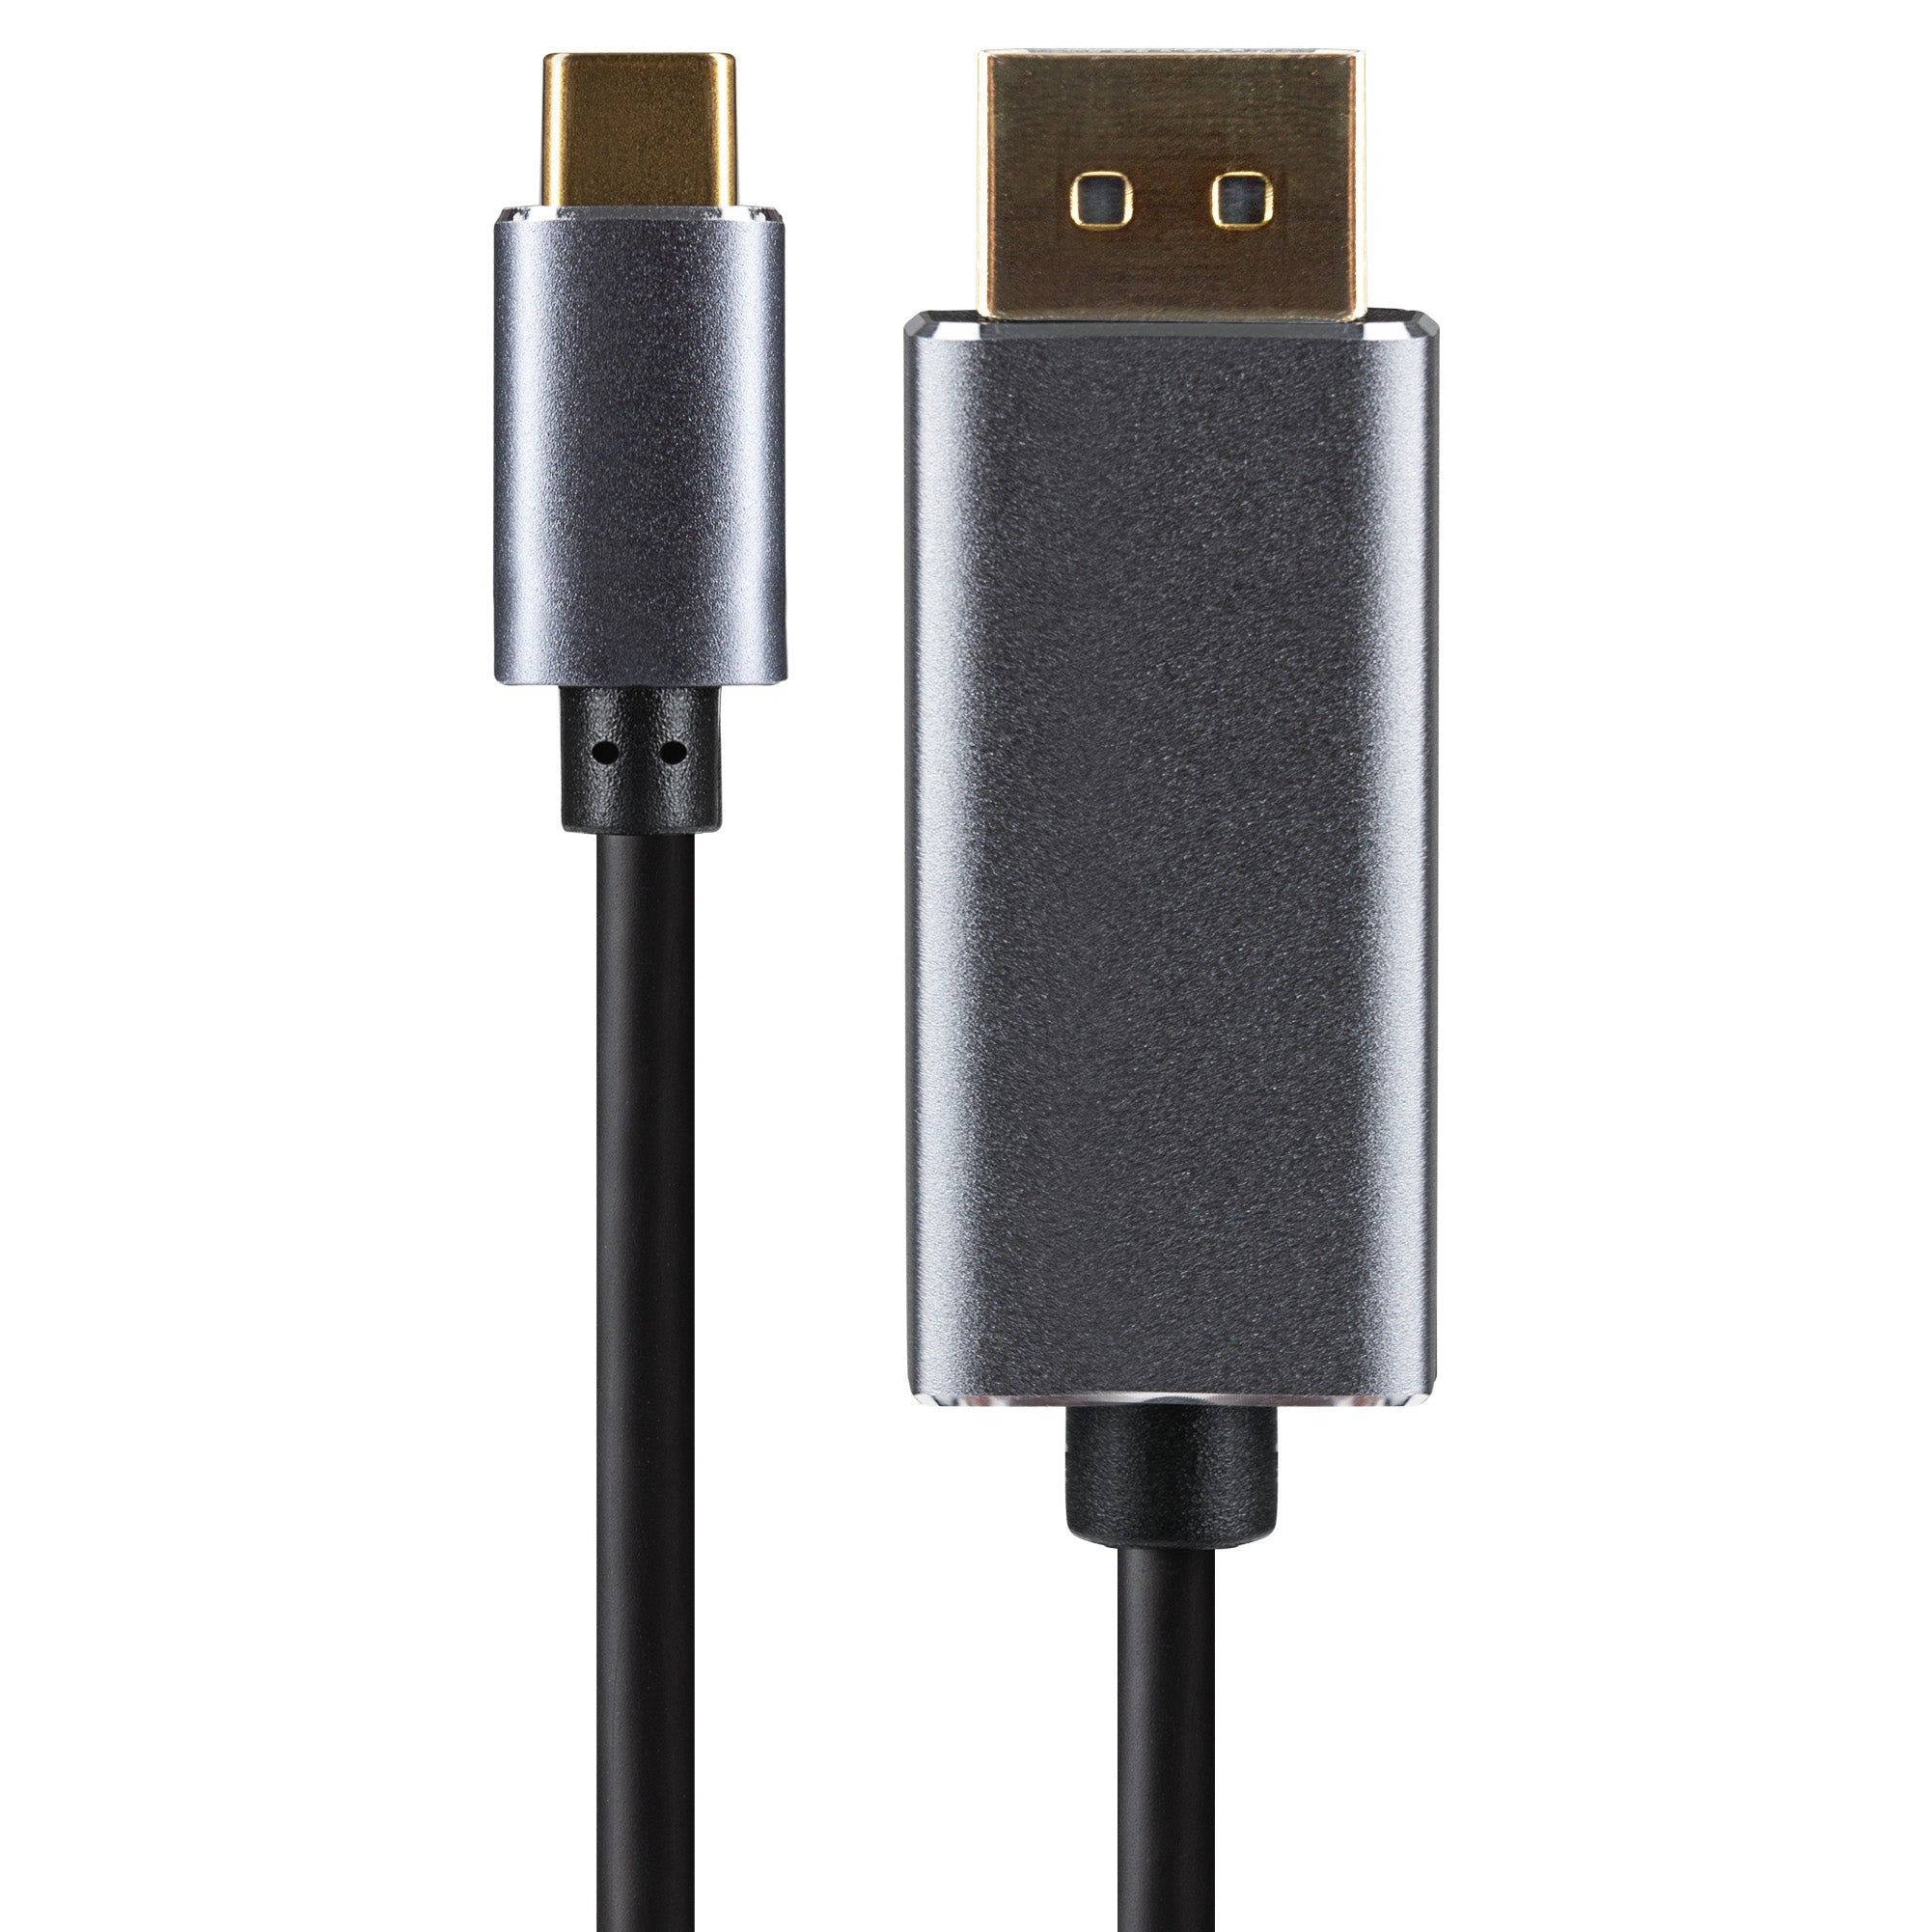 Maplin 8K USB-C to DisplayPort V1.4 Cable with Gold Connectors - Black & Silver, 2m